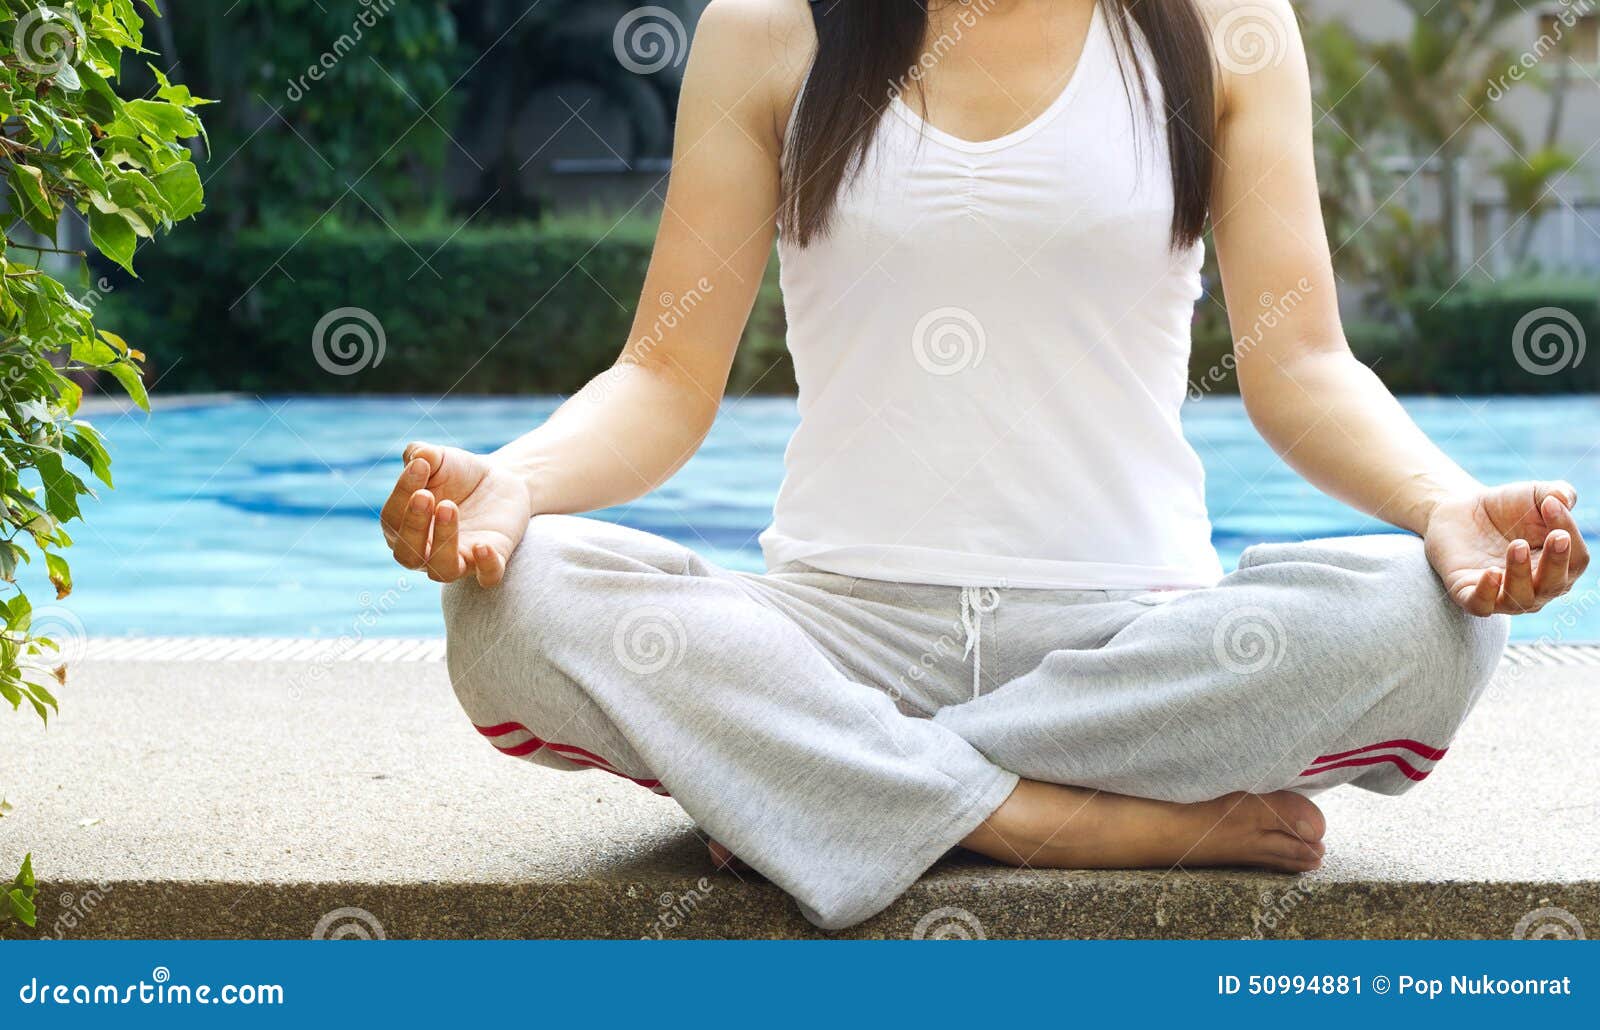 women siting meditation on swimming pool background